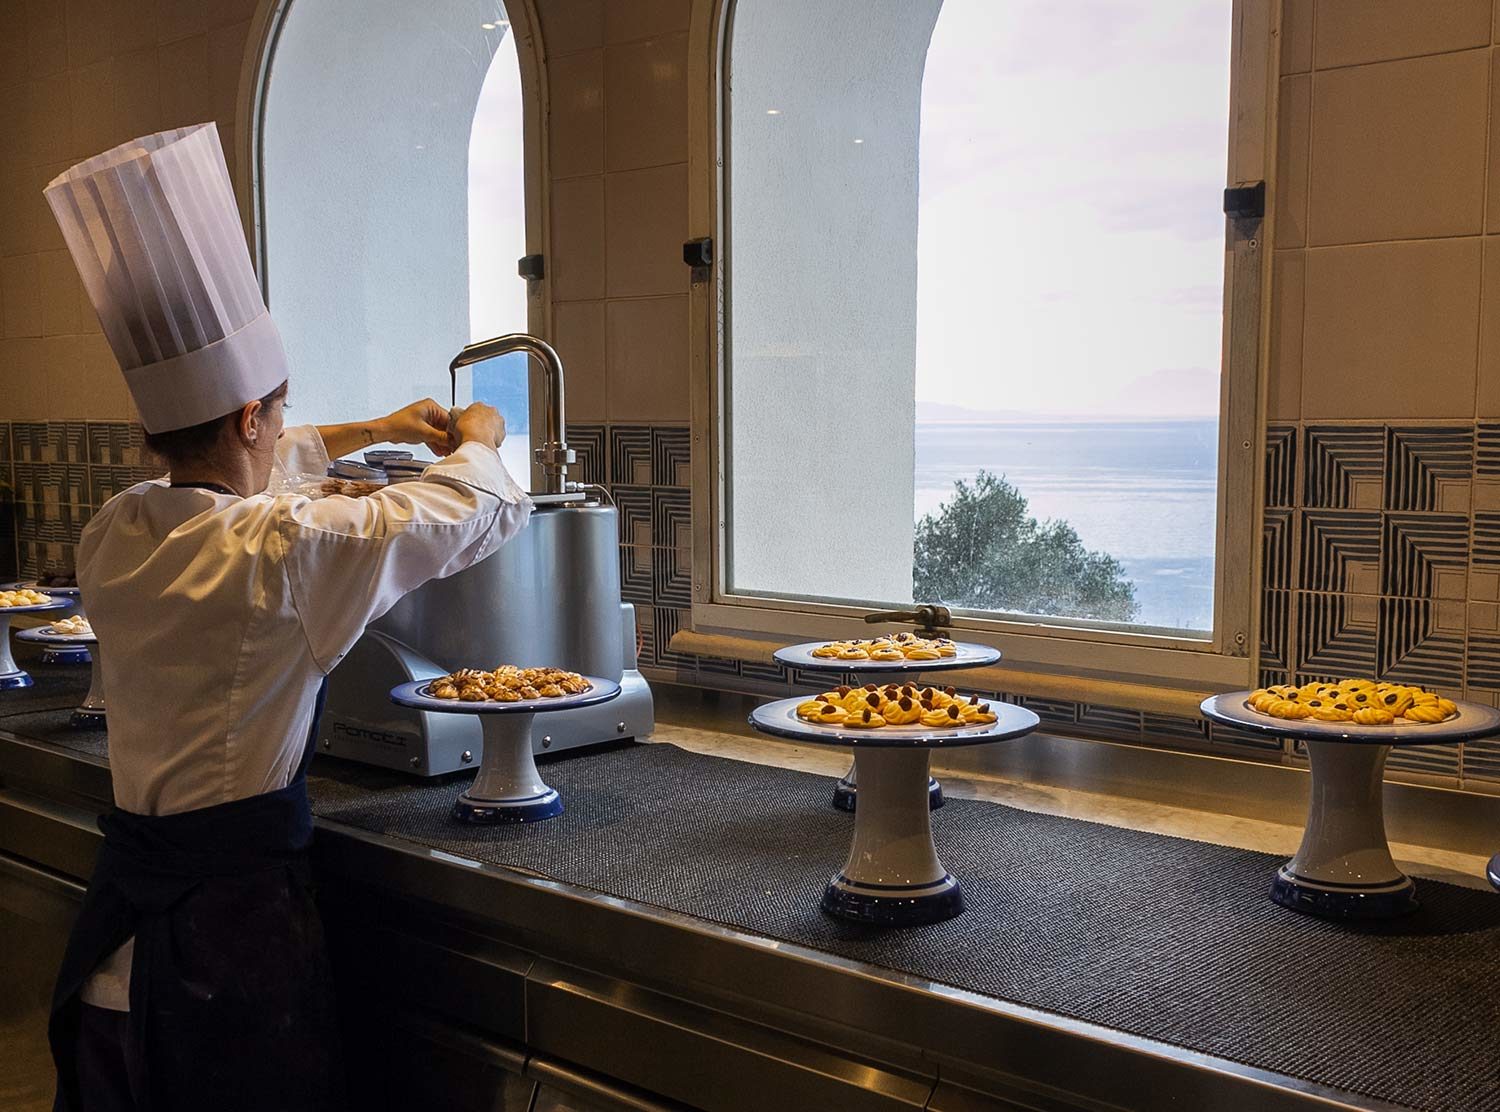 Borgo Santandrea As chef Crescenzo Scotti says, “Breakfast is an experience” and this is still somewhat of an understatement. You can start your day by dipping homemade pastries into a tap of melted dark chocolate...